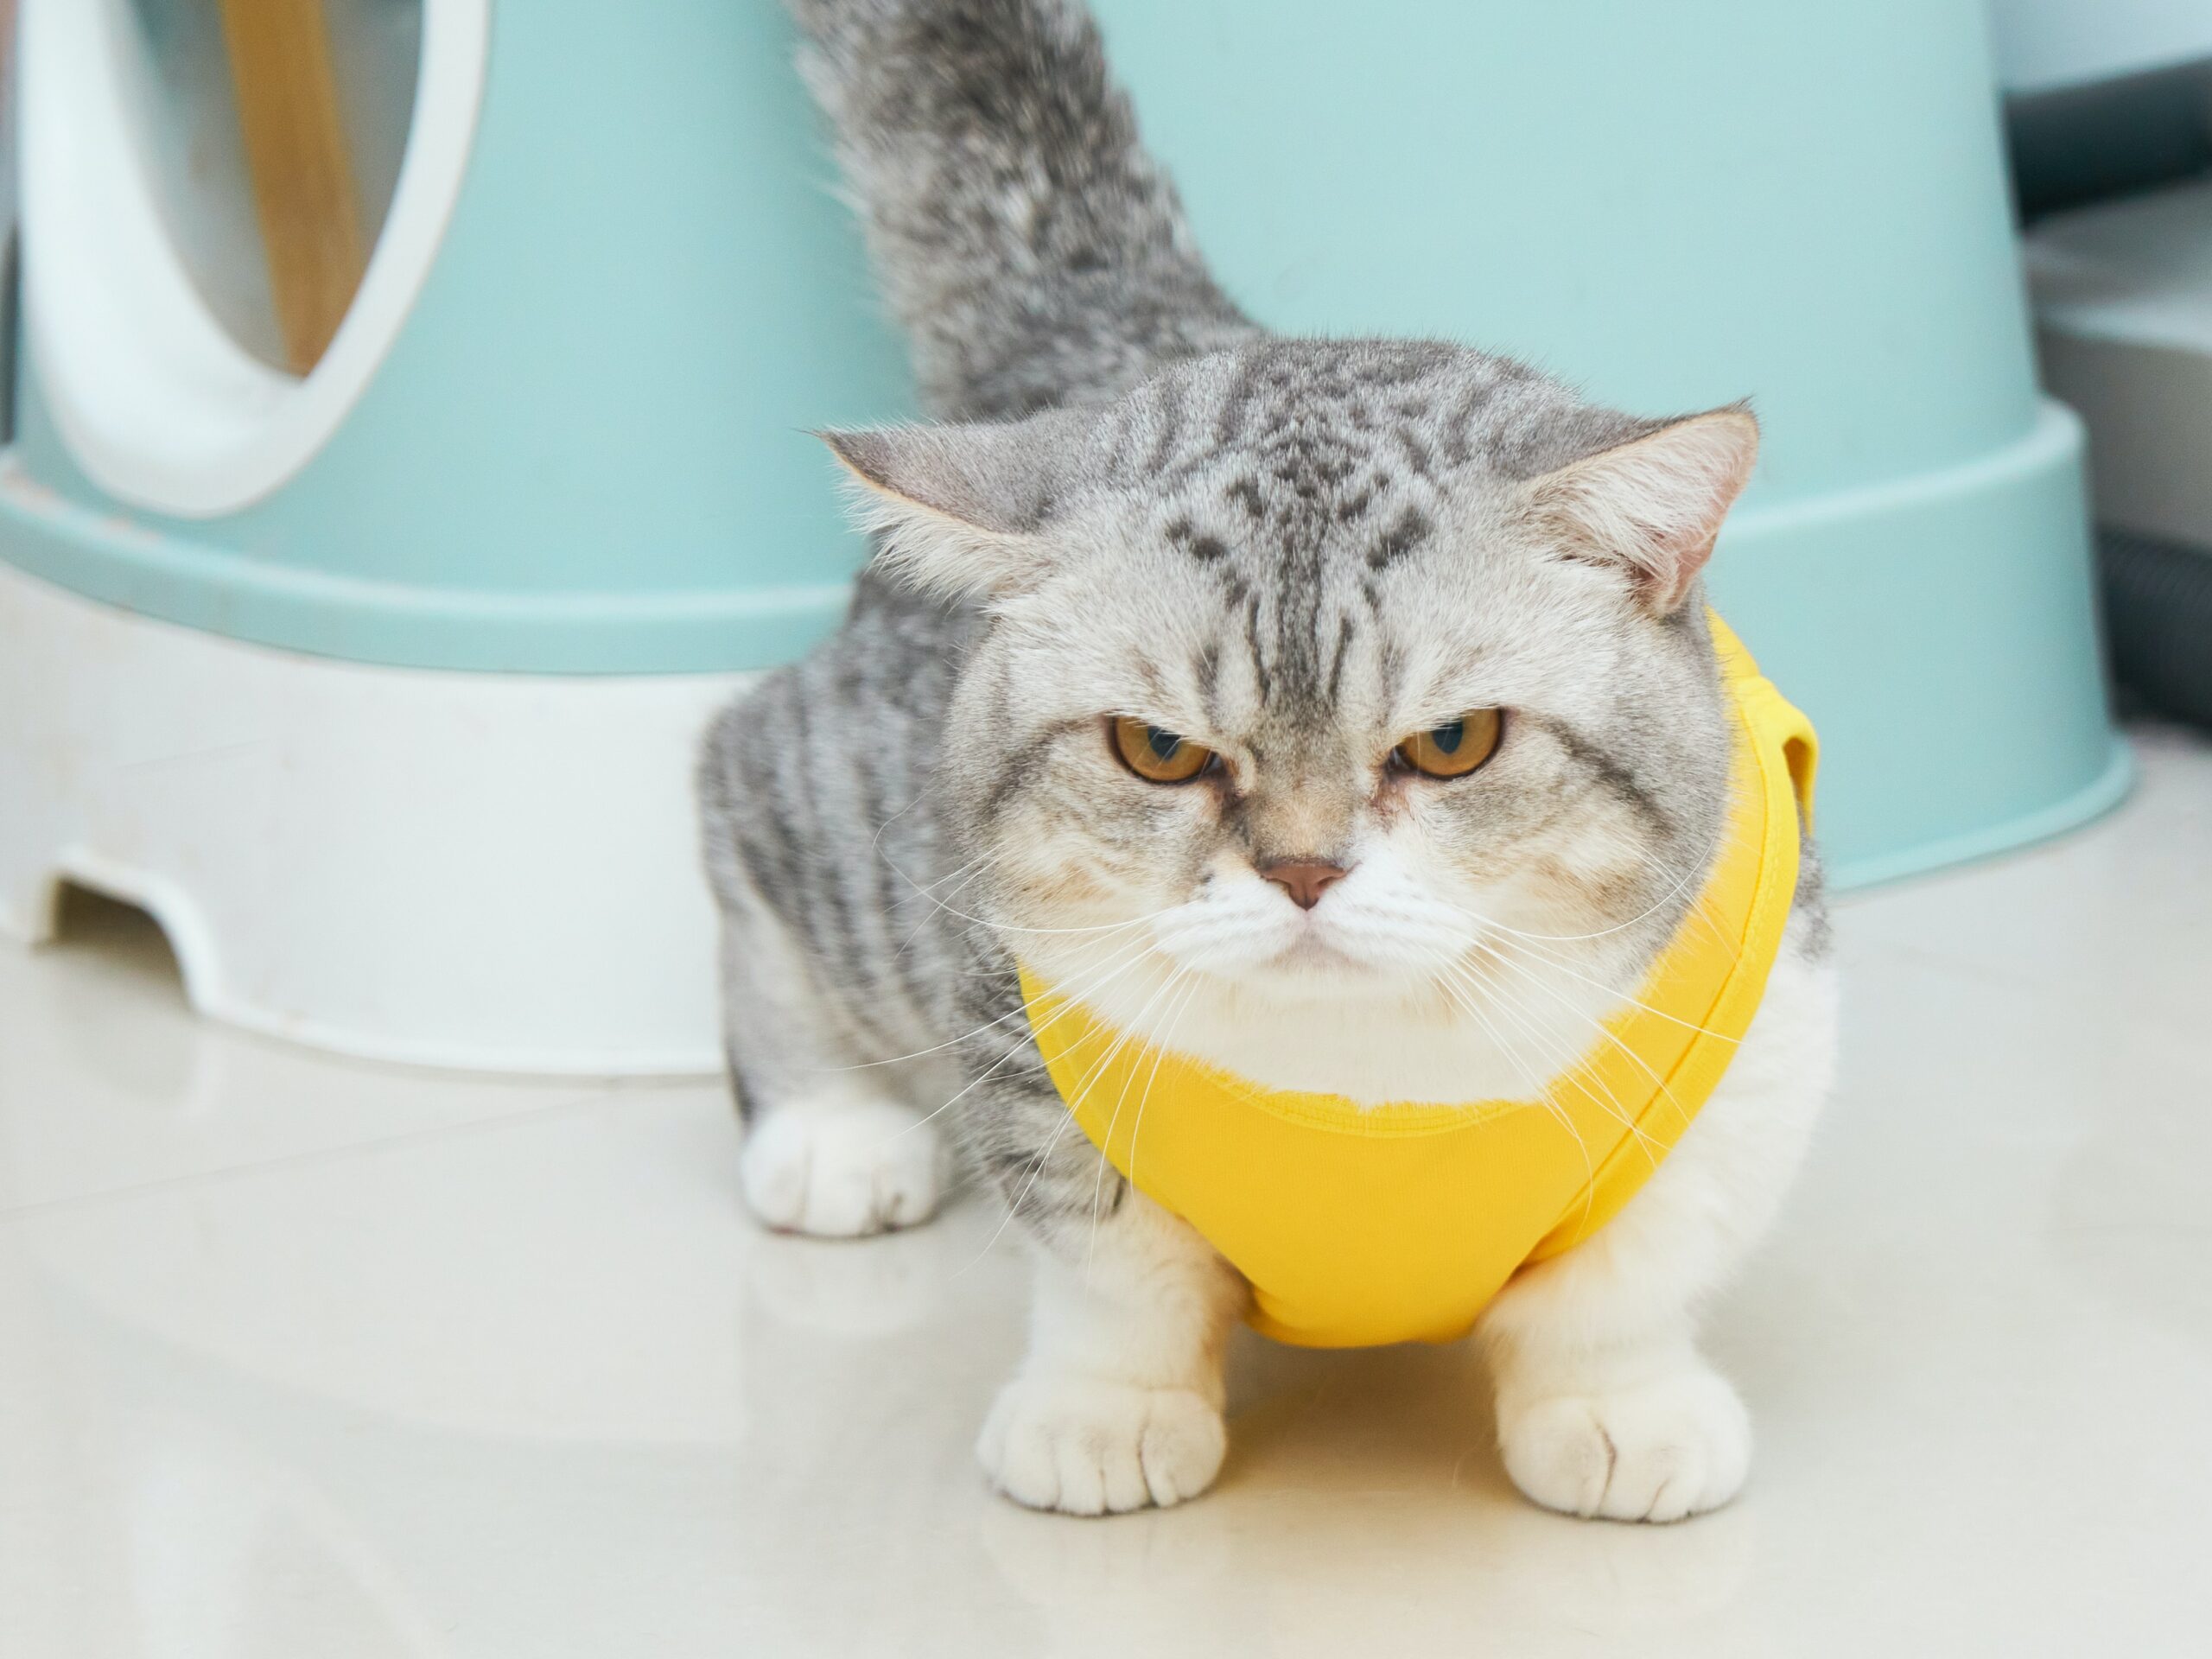 Angry looking Munchkin cat with a yellow vest